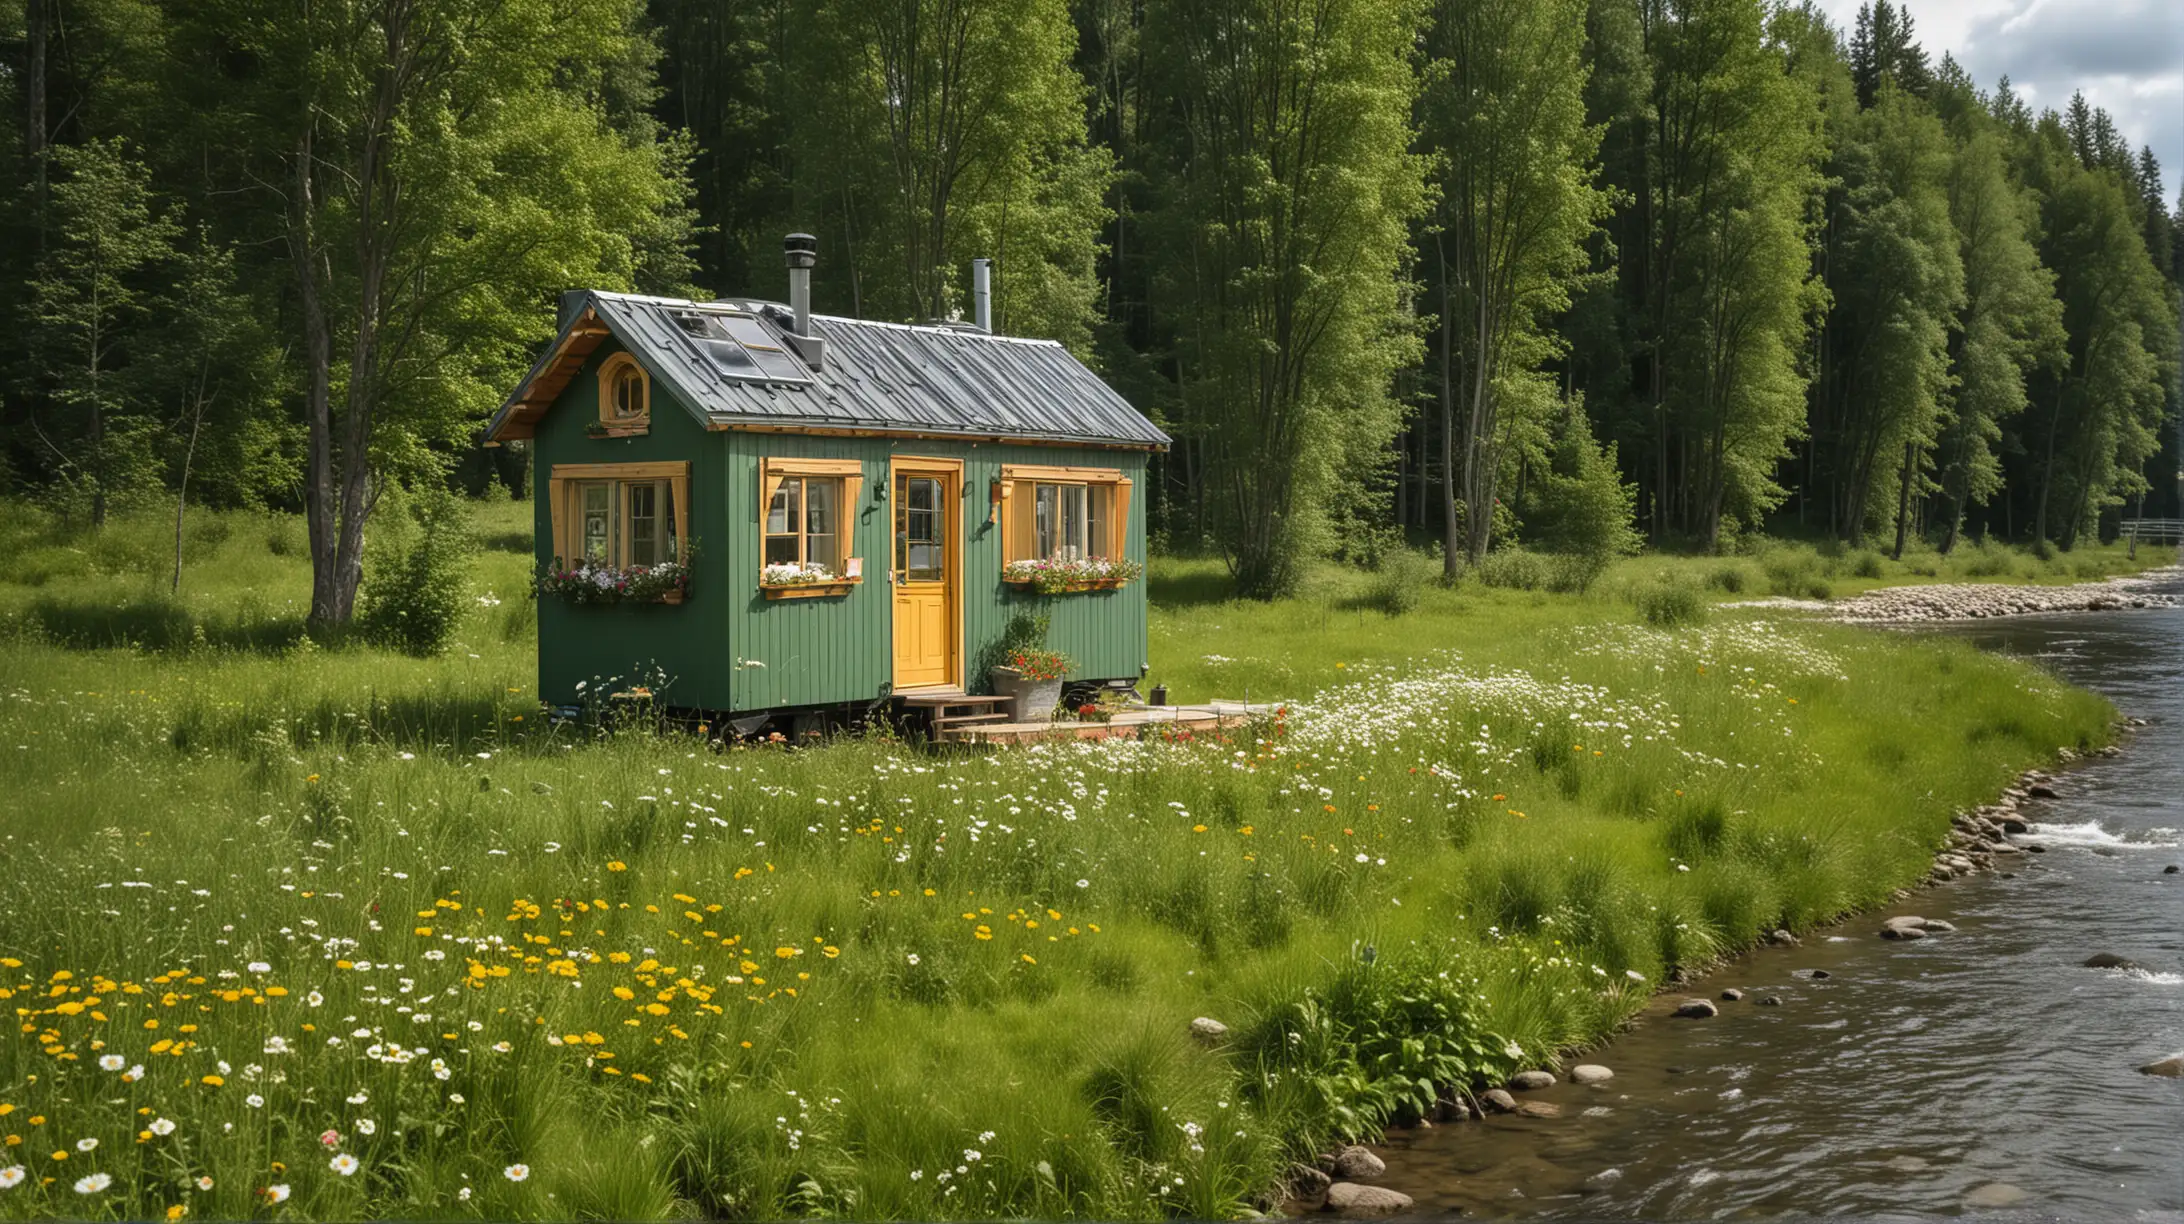 Riverside Tiny House Amidst Blooming Meadow